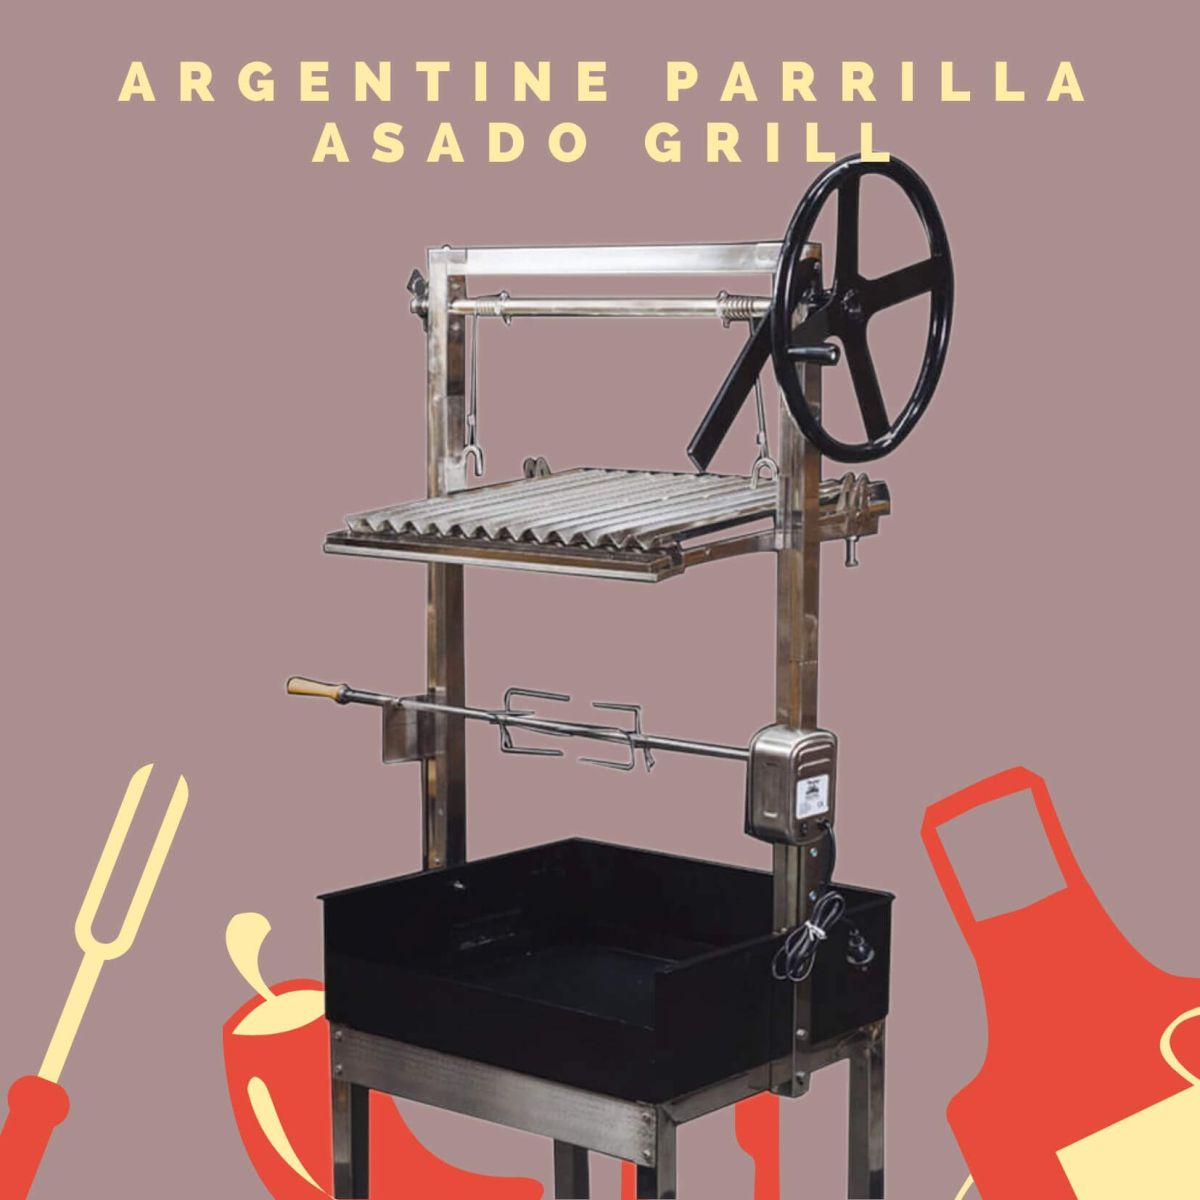 This_image_shows_Argentine_Parrilla_Asado_Grill